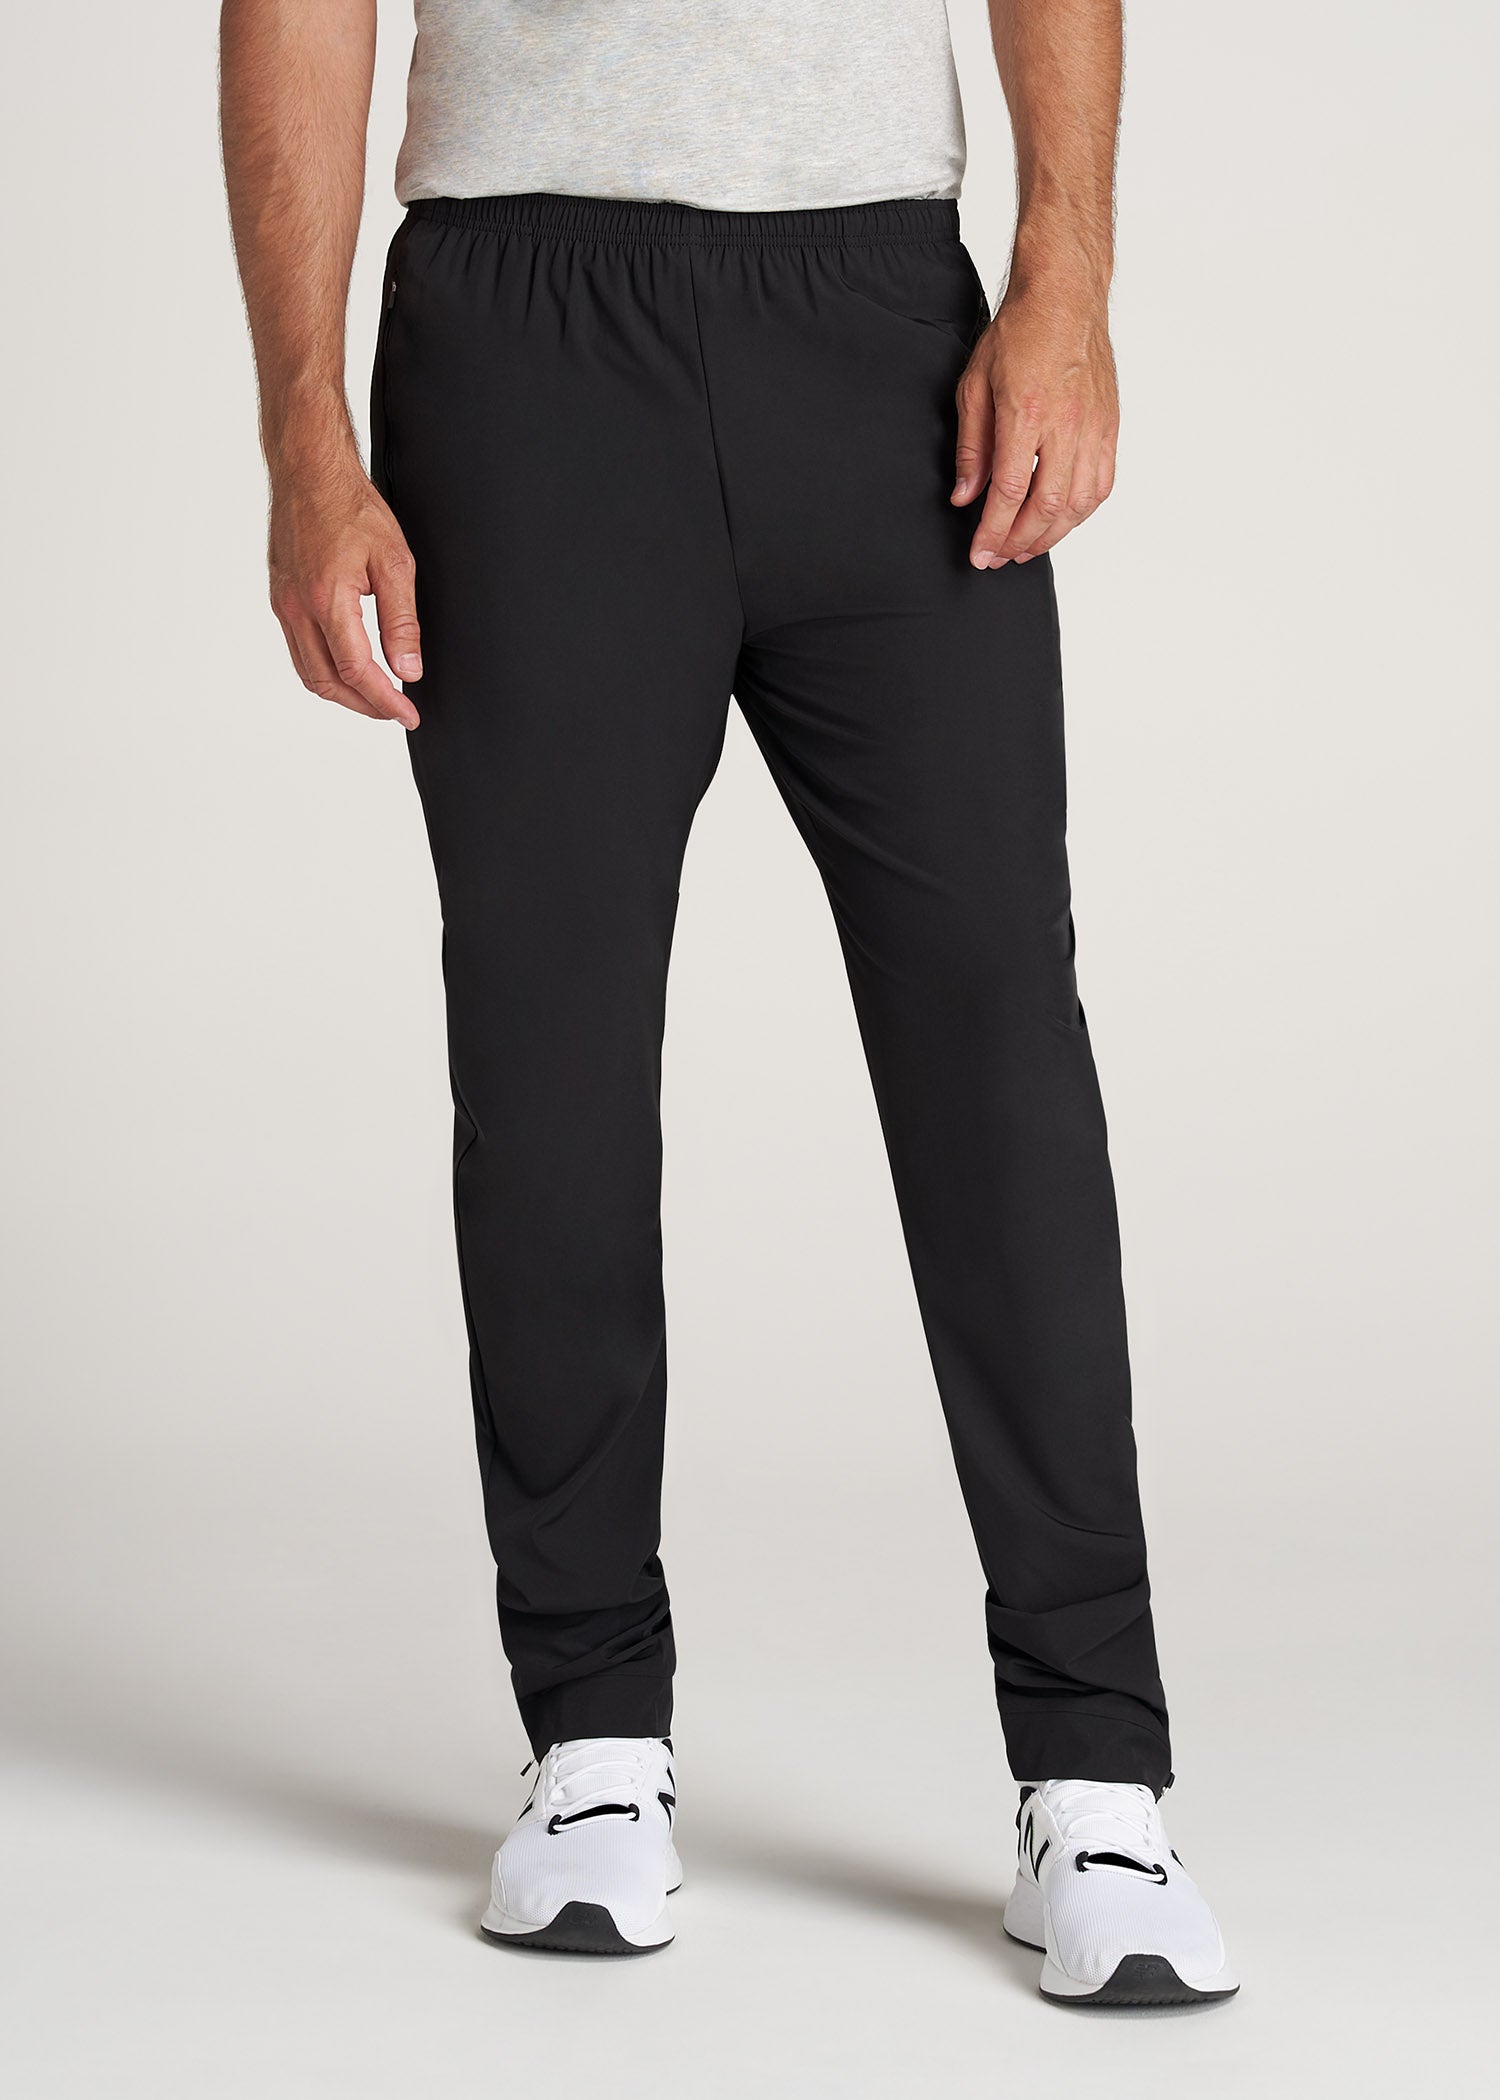 Lightweight Athletic Pants for Tall Men in Black